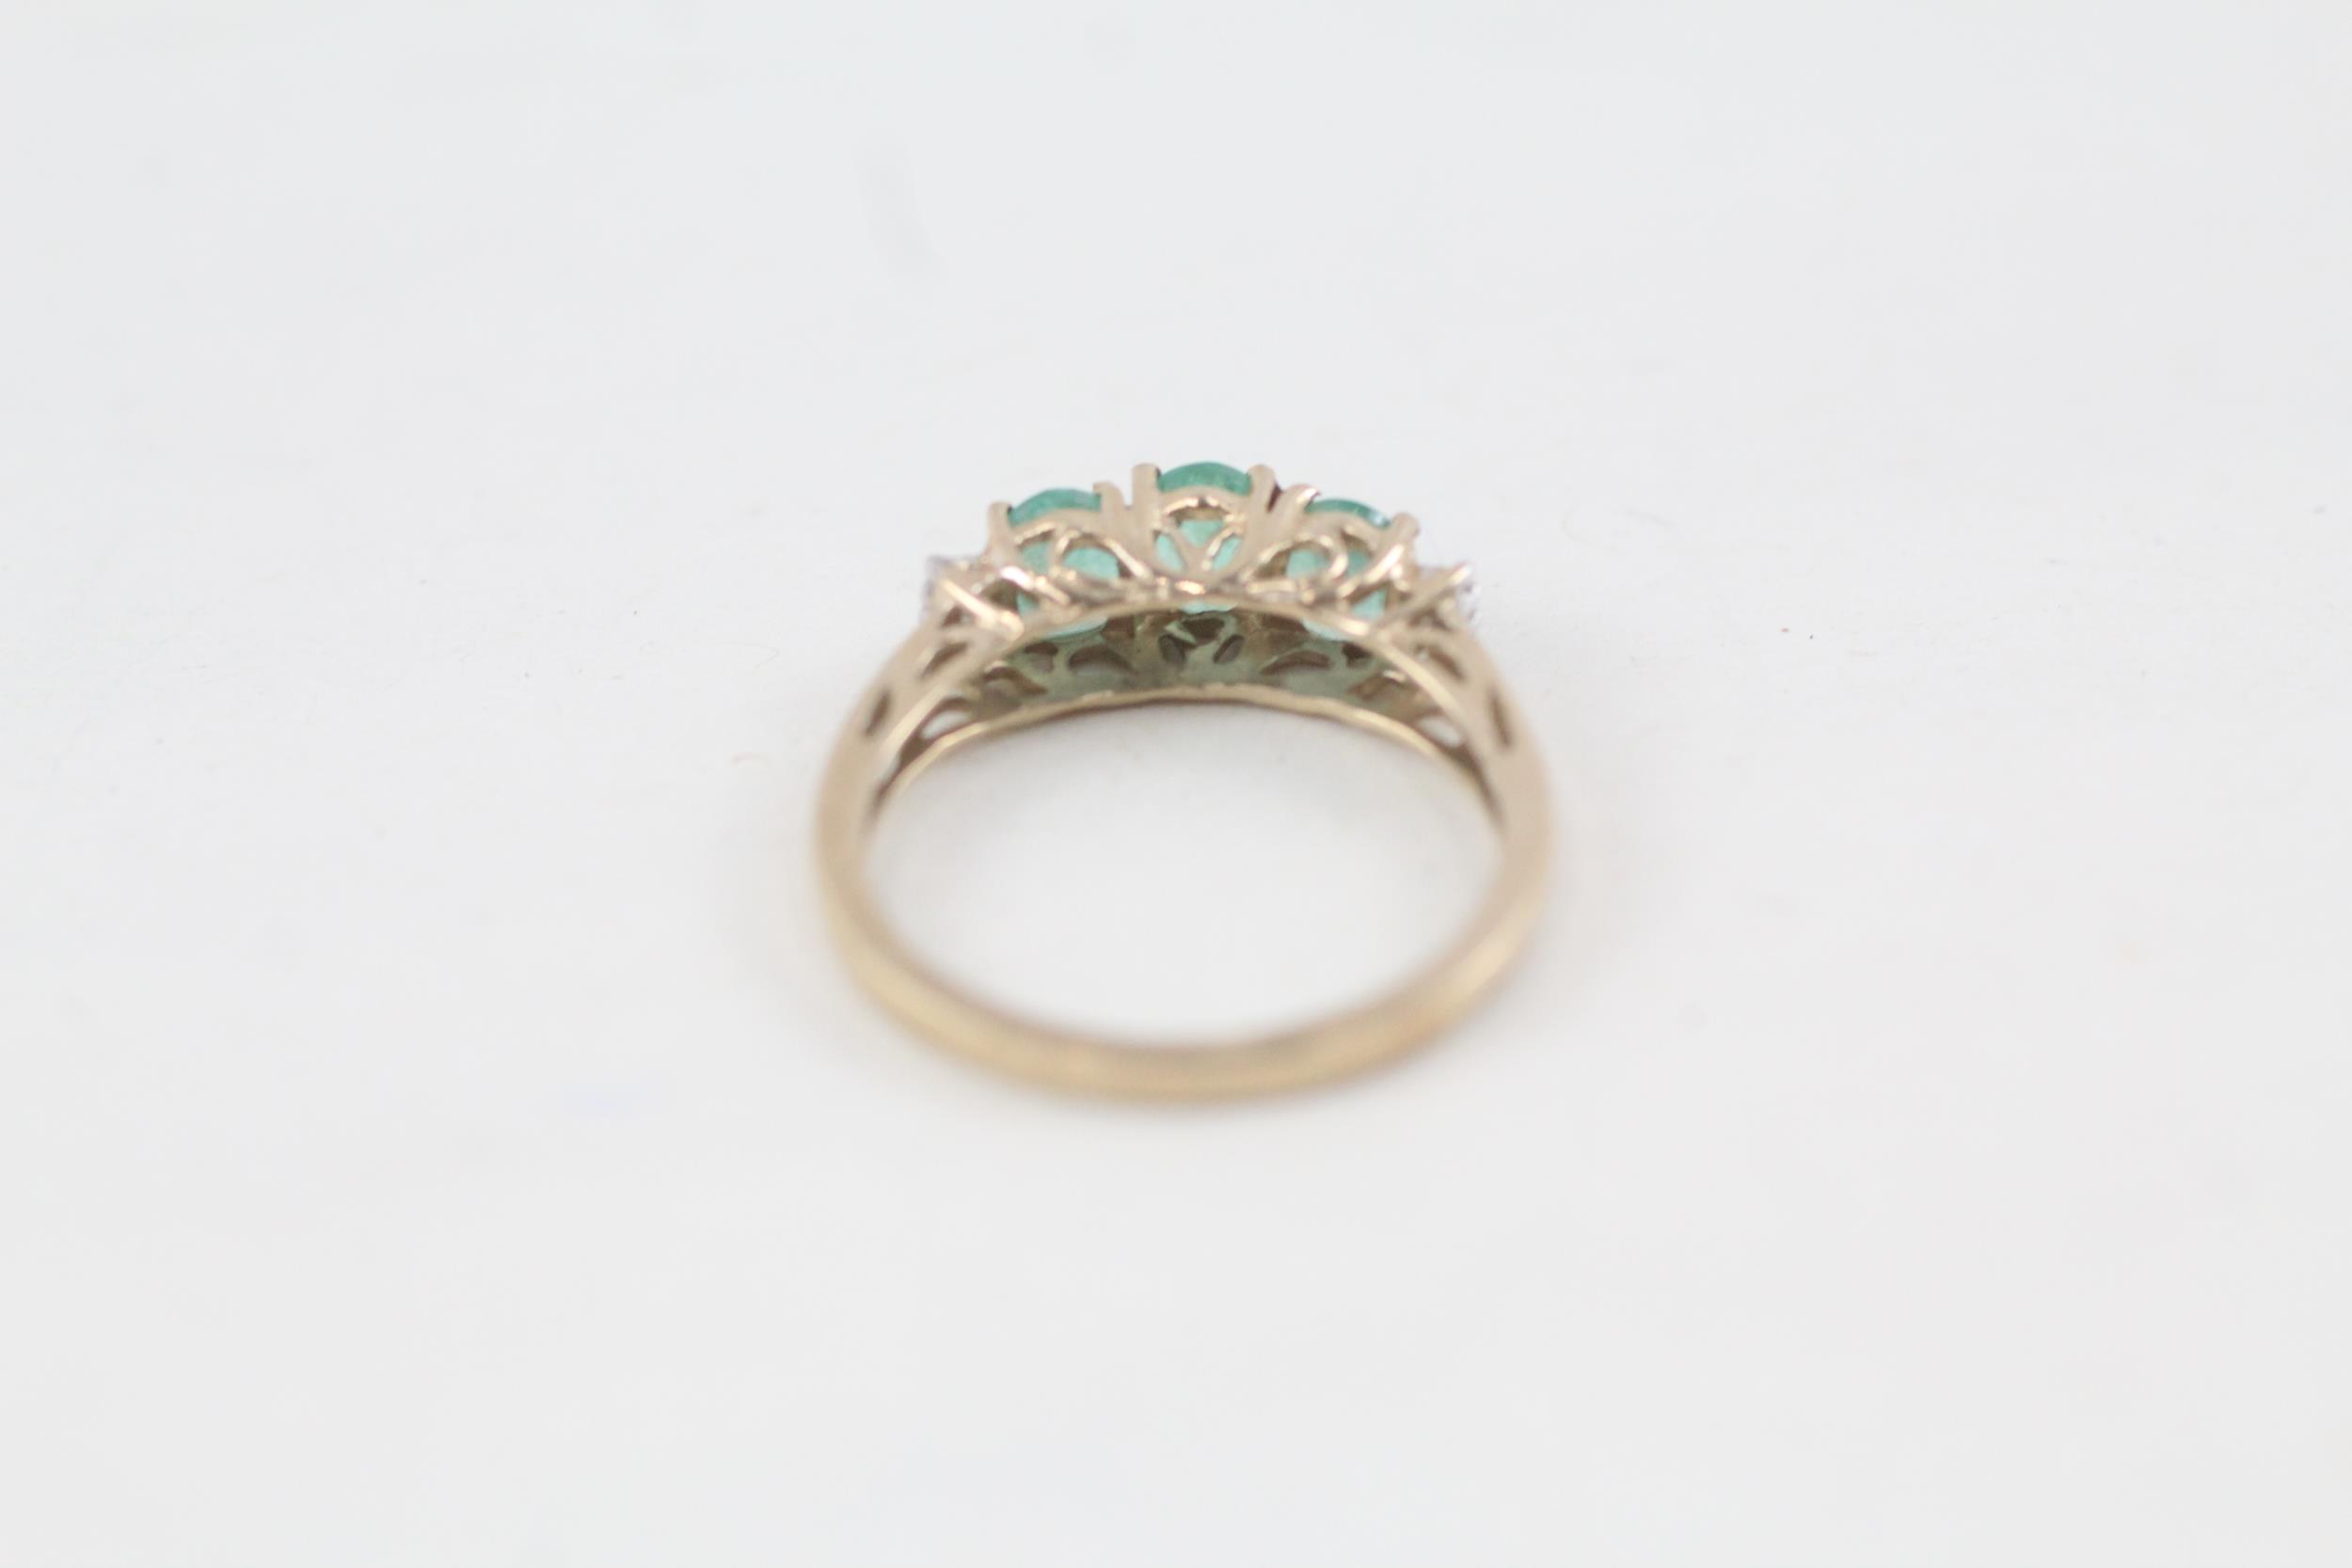 9ct gold emerald three stone ring with diamond sides (1.8g) Size N 1/2 - Image 3 of 4